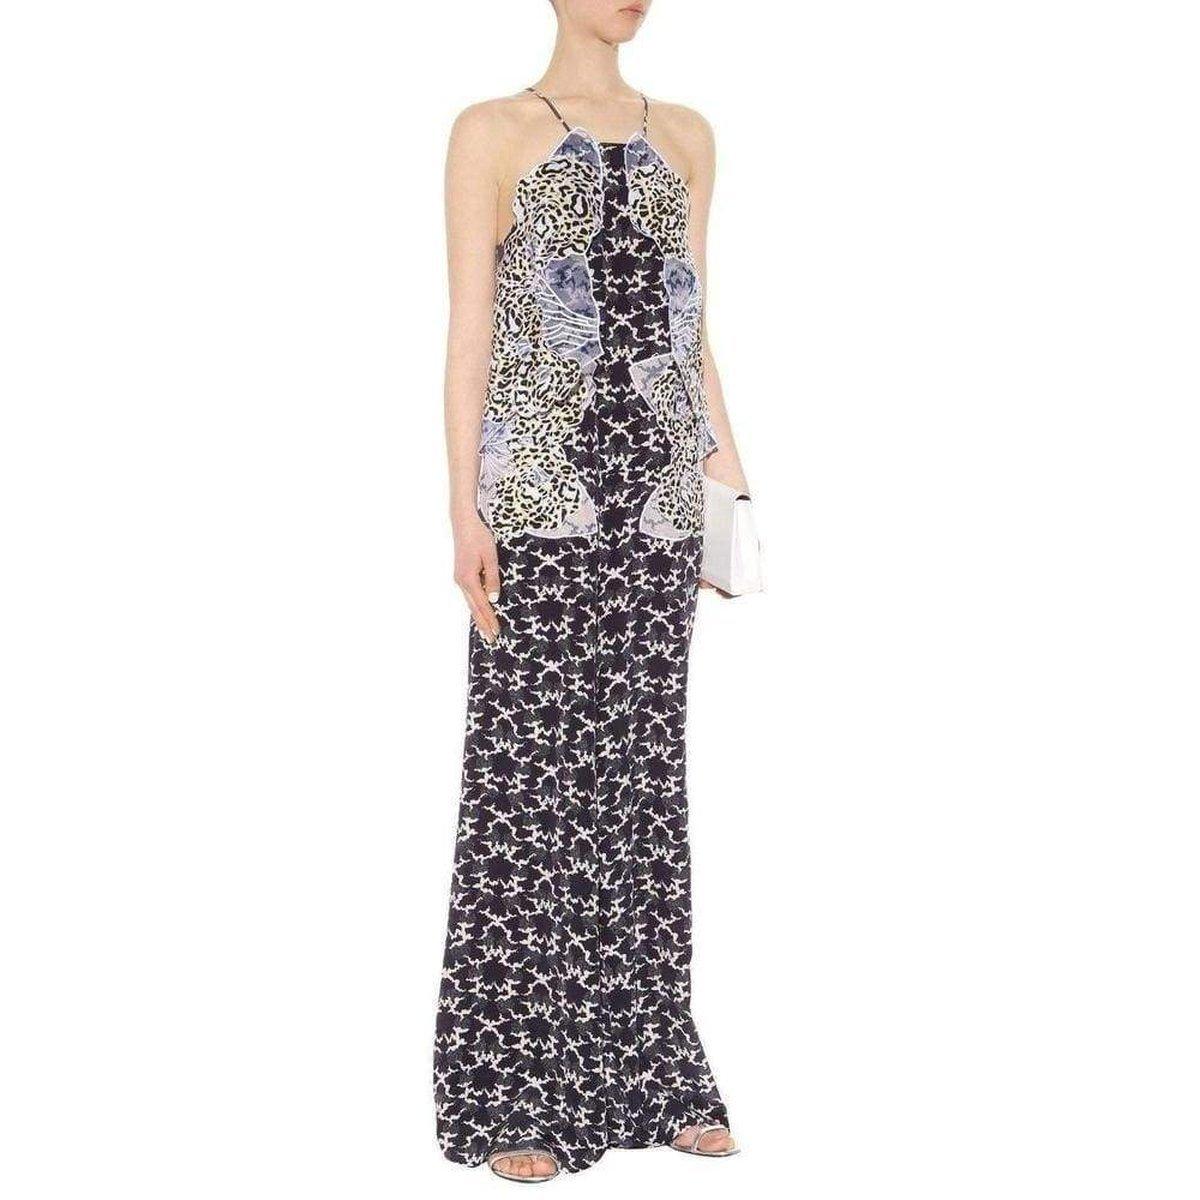 Stella McCartney Applique Silk Jumpsuit IT42 (US6) In New Condition For Sale In Brossard, QC